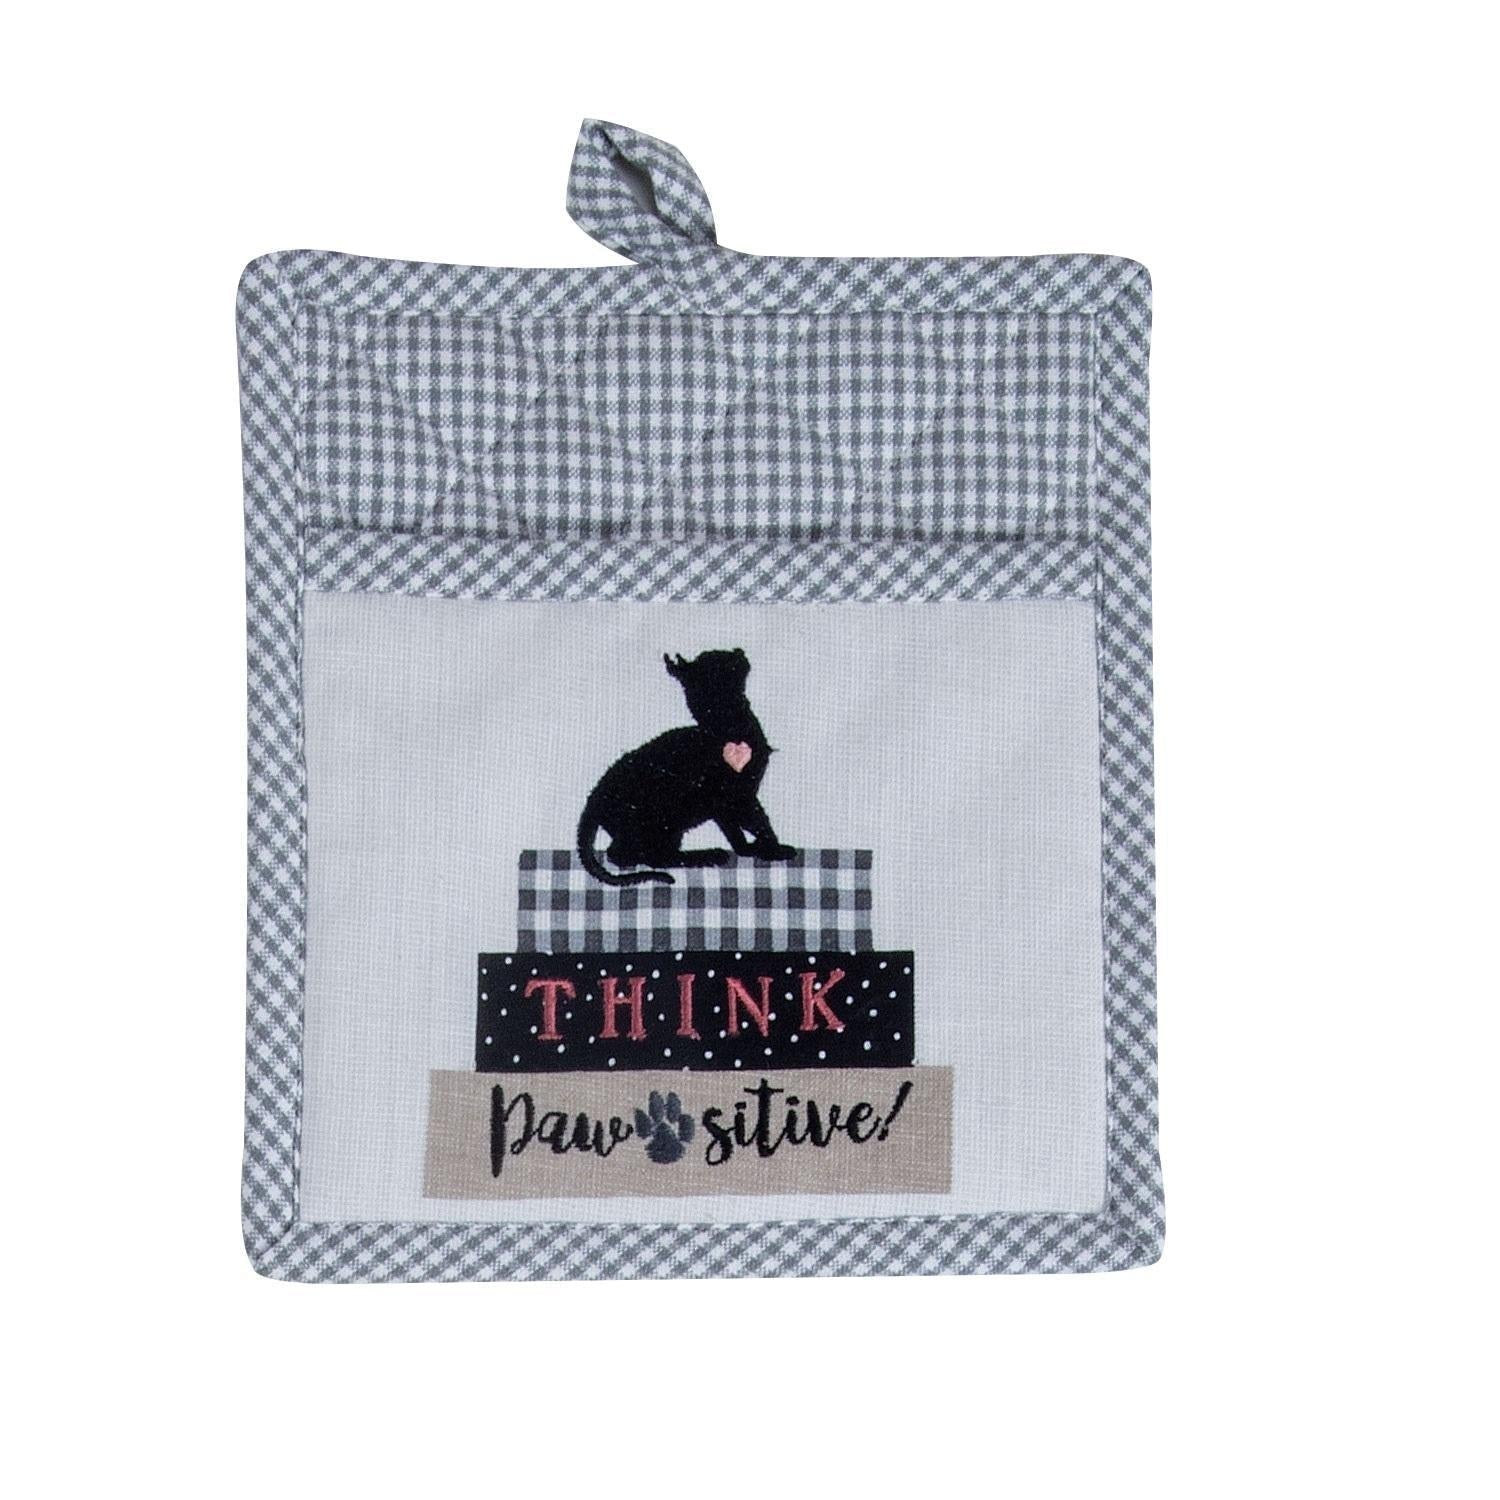 Embroidered Pocket Oven Mitt "Think Pawsitive"